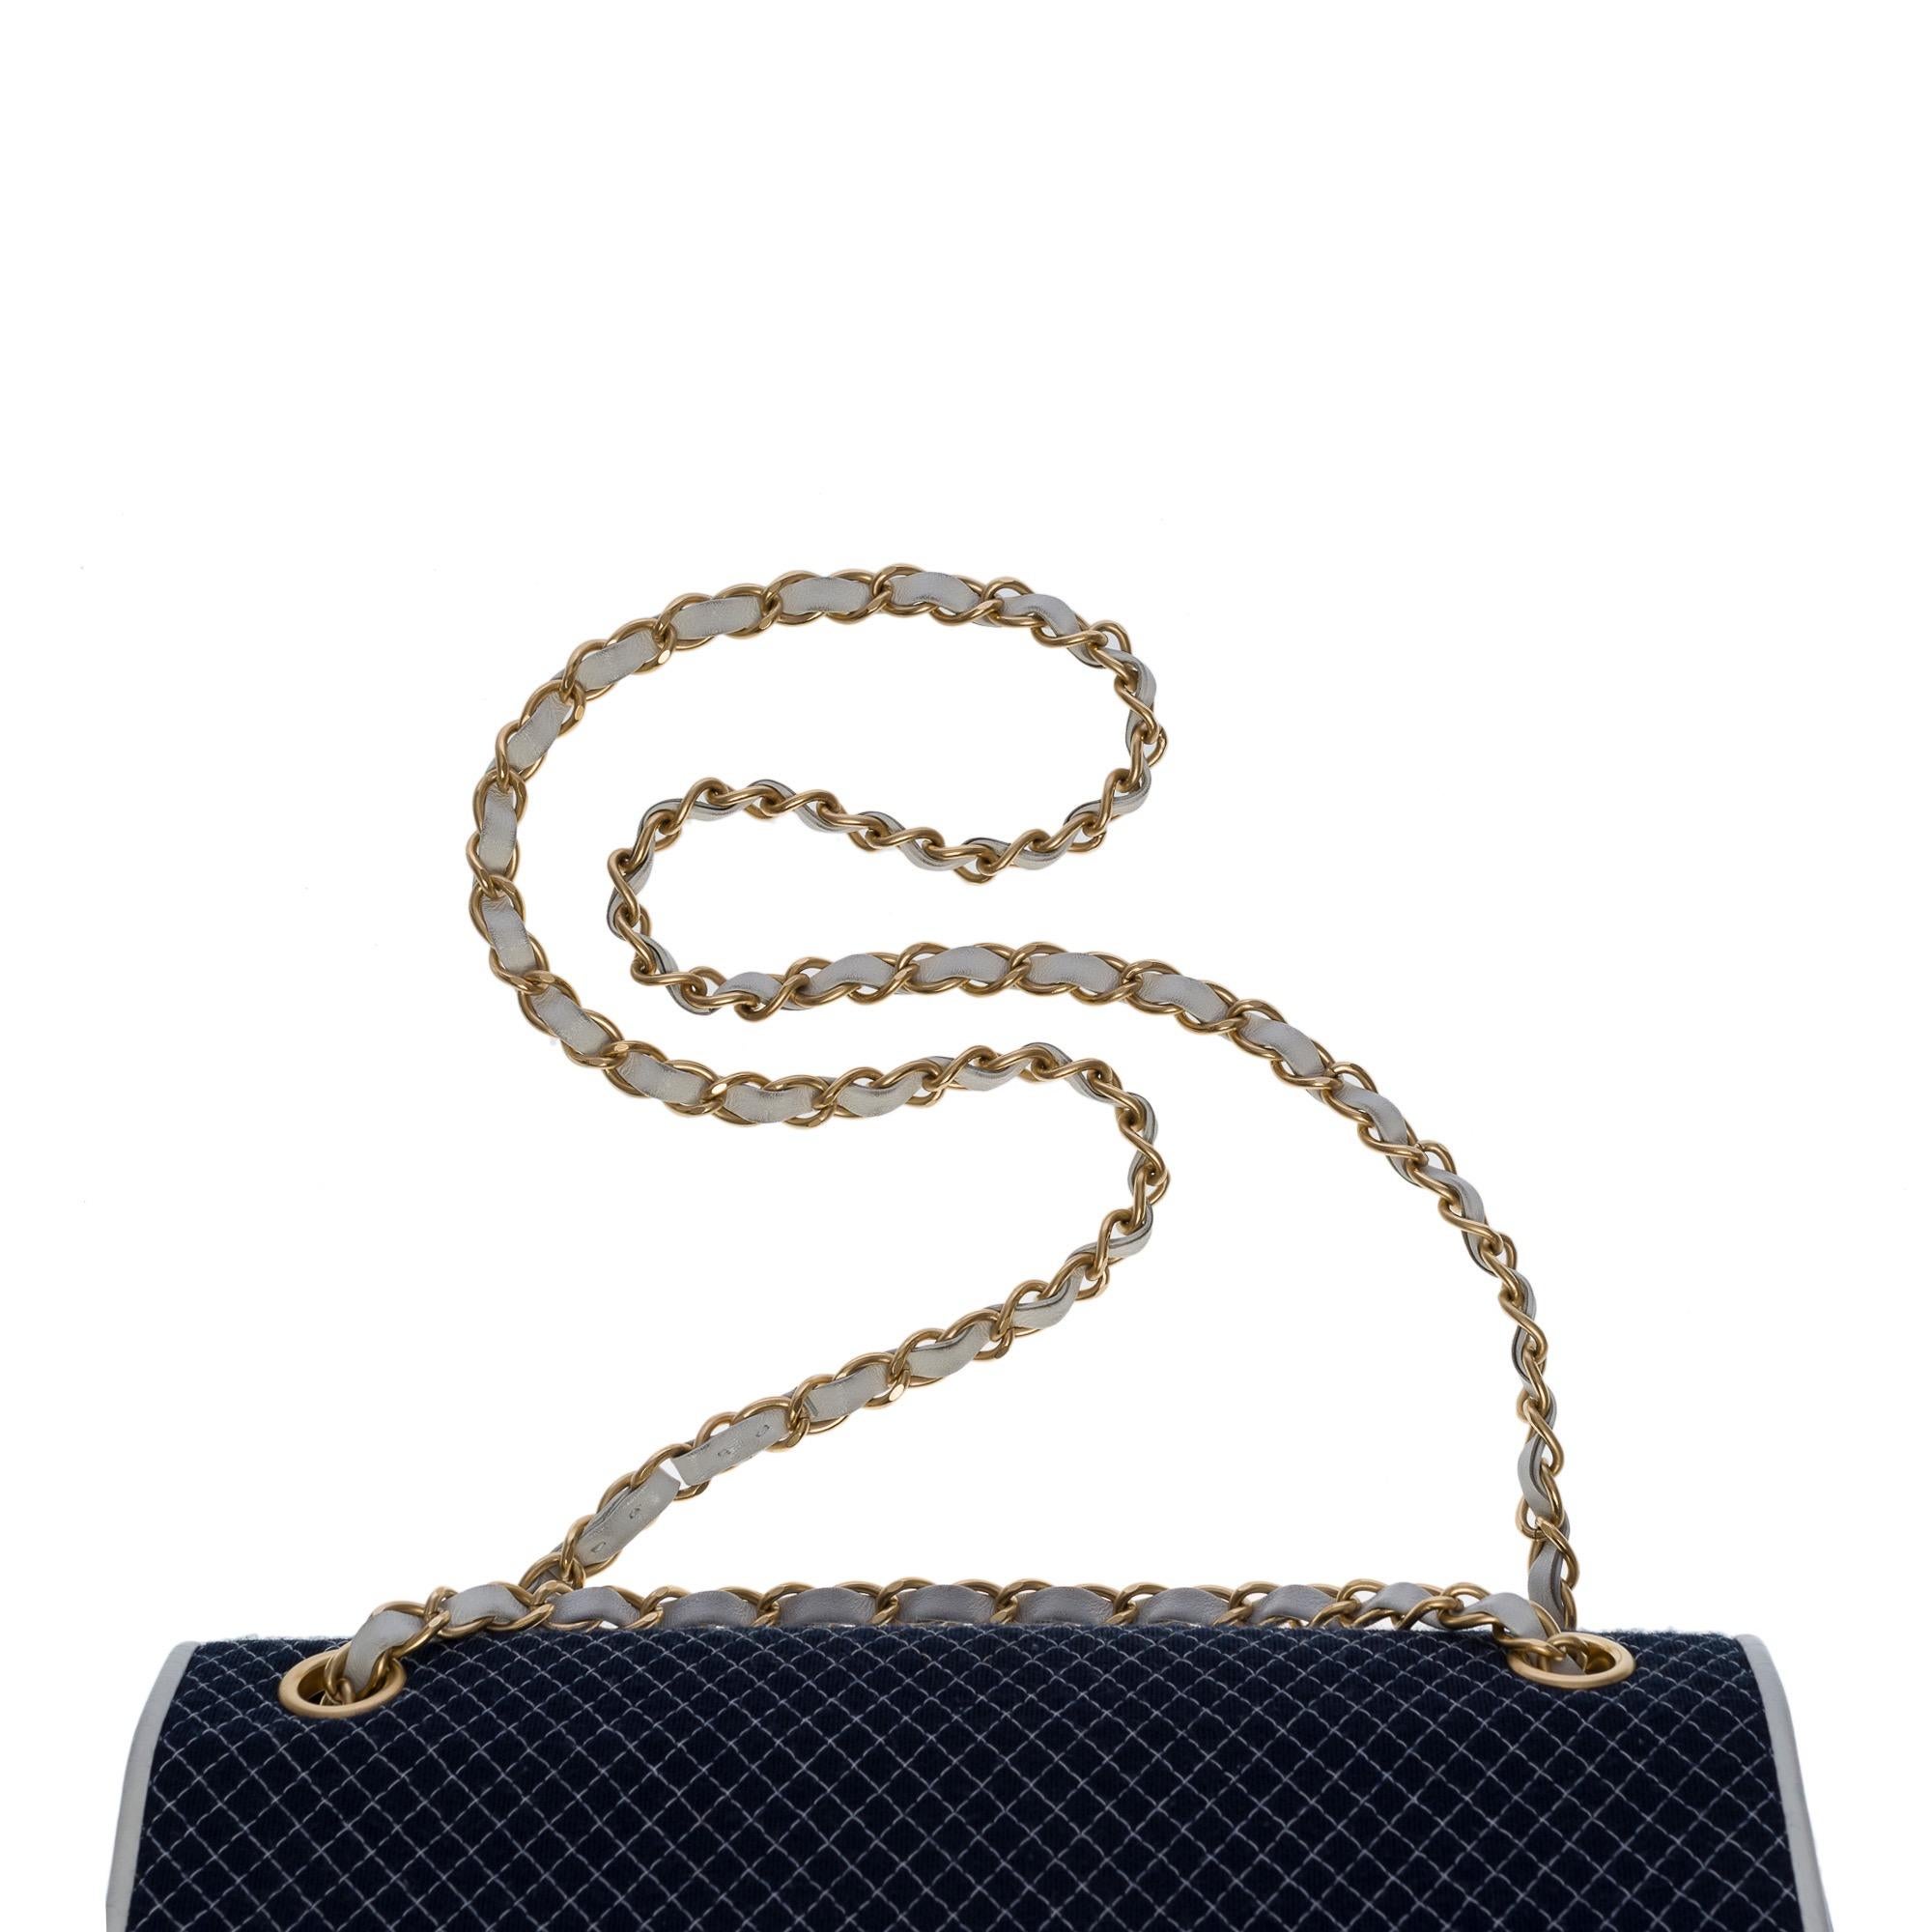 Chanel Timeless/Classic shoulder bag in navy blue jersey, GHW For Sale 4